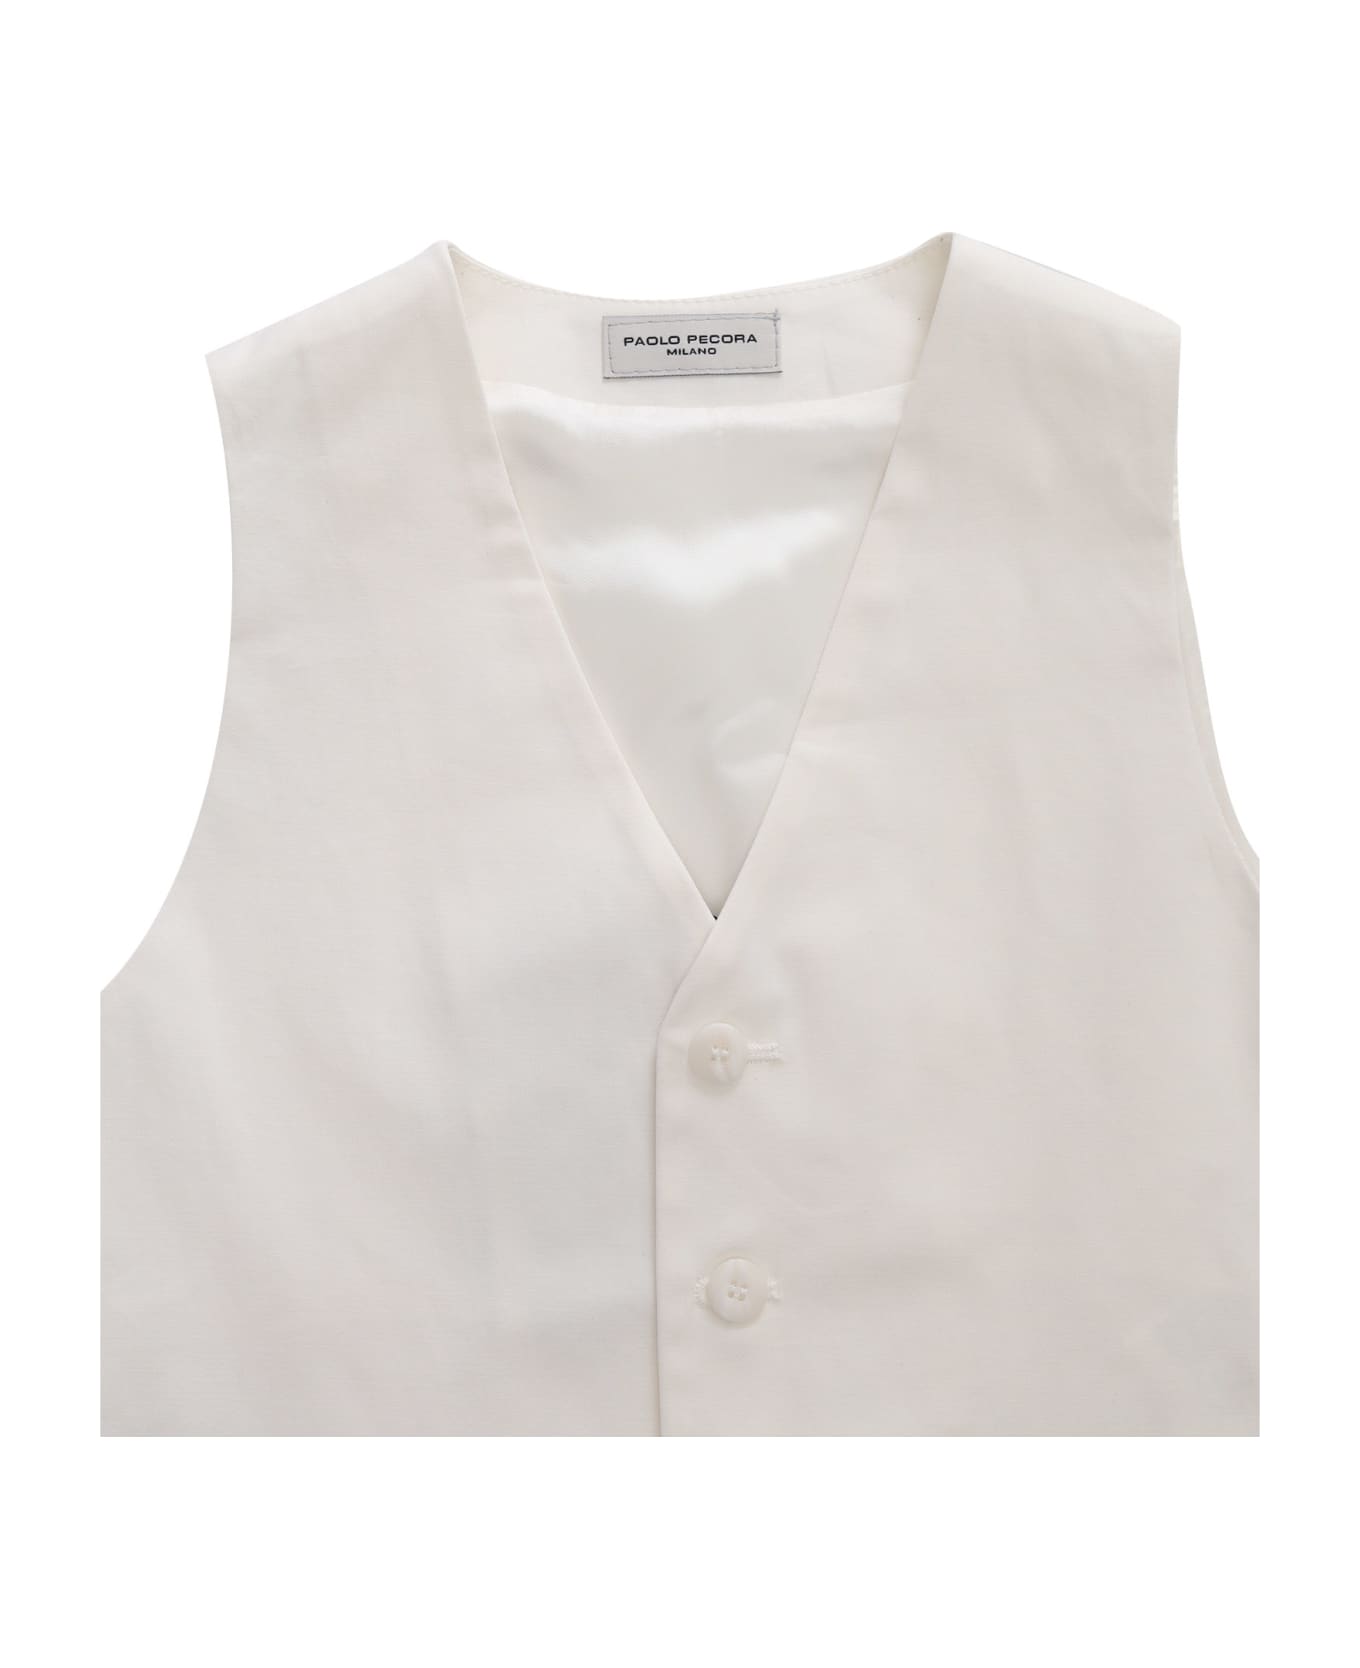 Paolo Pecora Tailored Vest - WHITE トップス